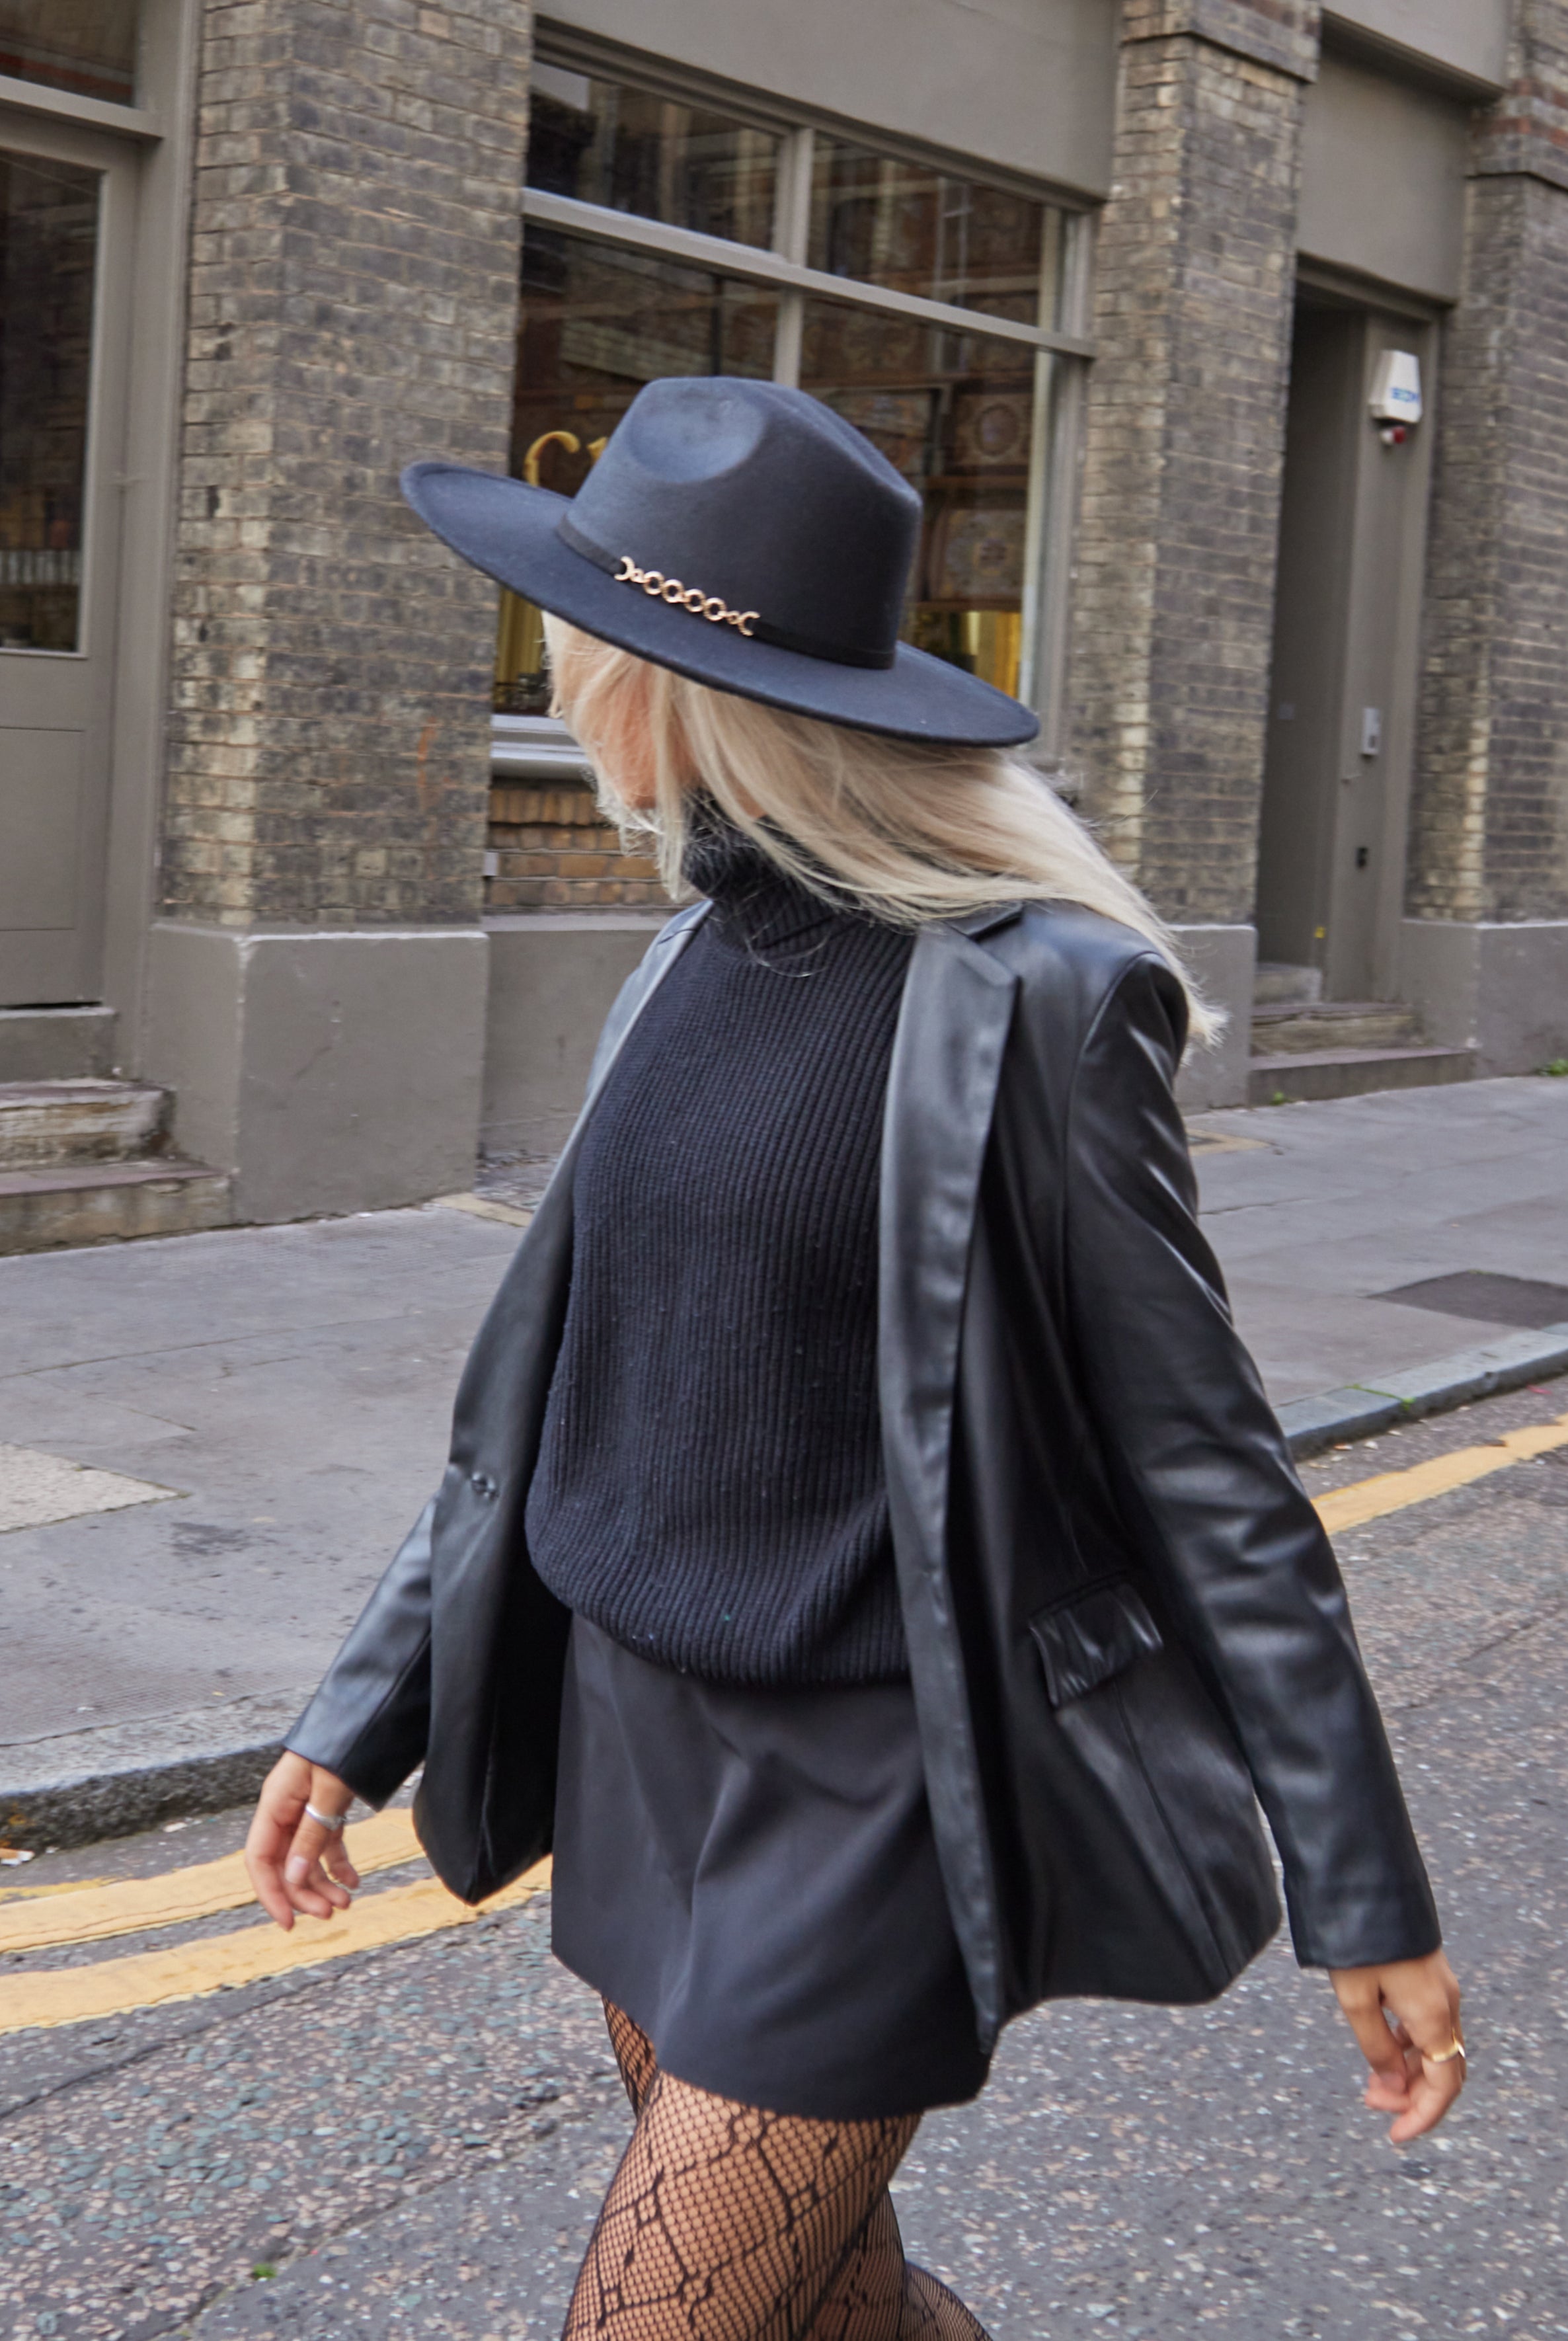 Oversized Fedora Hat in Black with Buckle detail and size adjuster | Winter | Autumn | Walks | Pub | Casual | Oversized | Hat | Accessory | Accessories | twee | Old money | Plaza core | Country | Streetwear | Indie